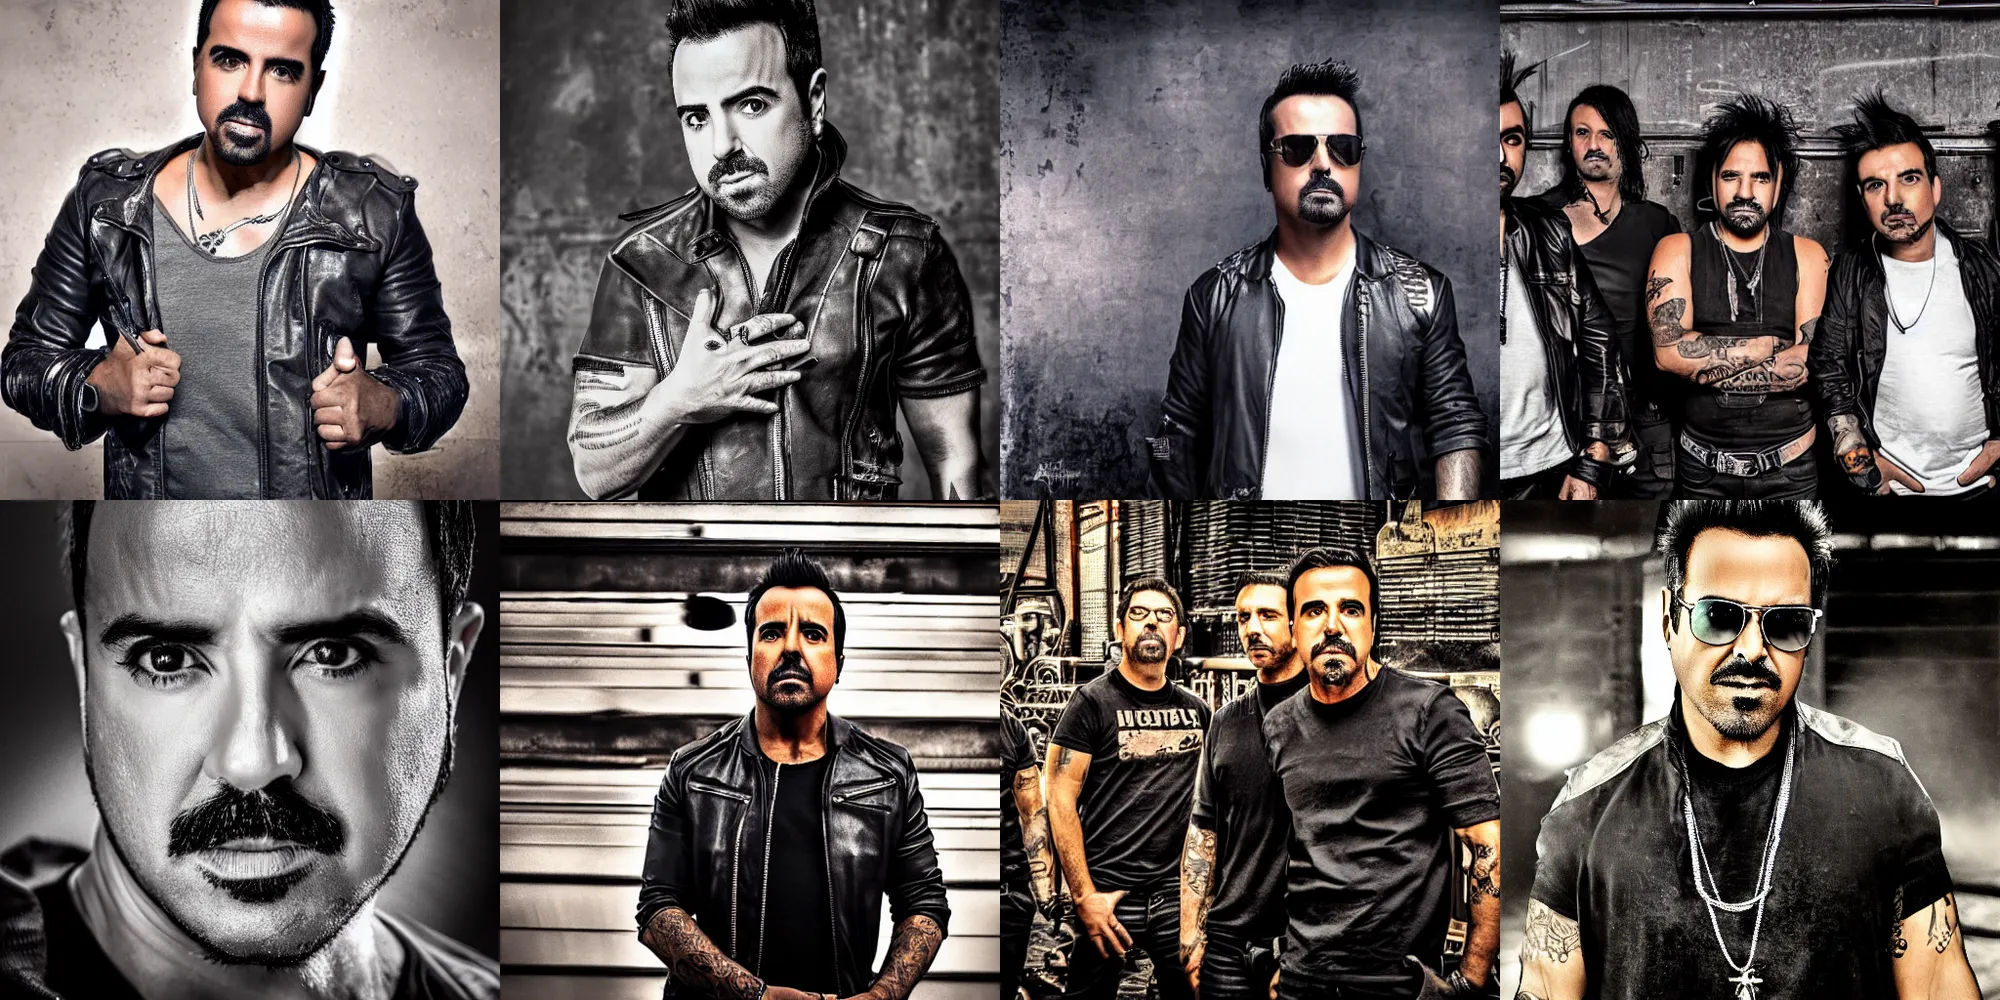 Prompt: Luis Fonsi in an Industrial Metal band, hdr, award-winning photograph